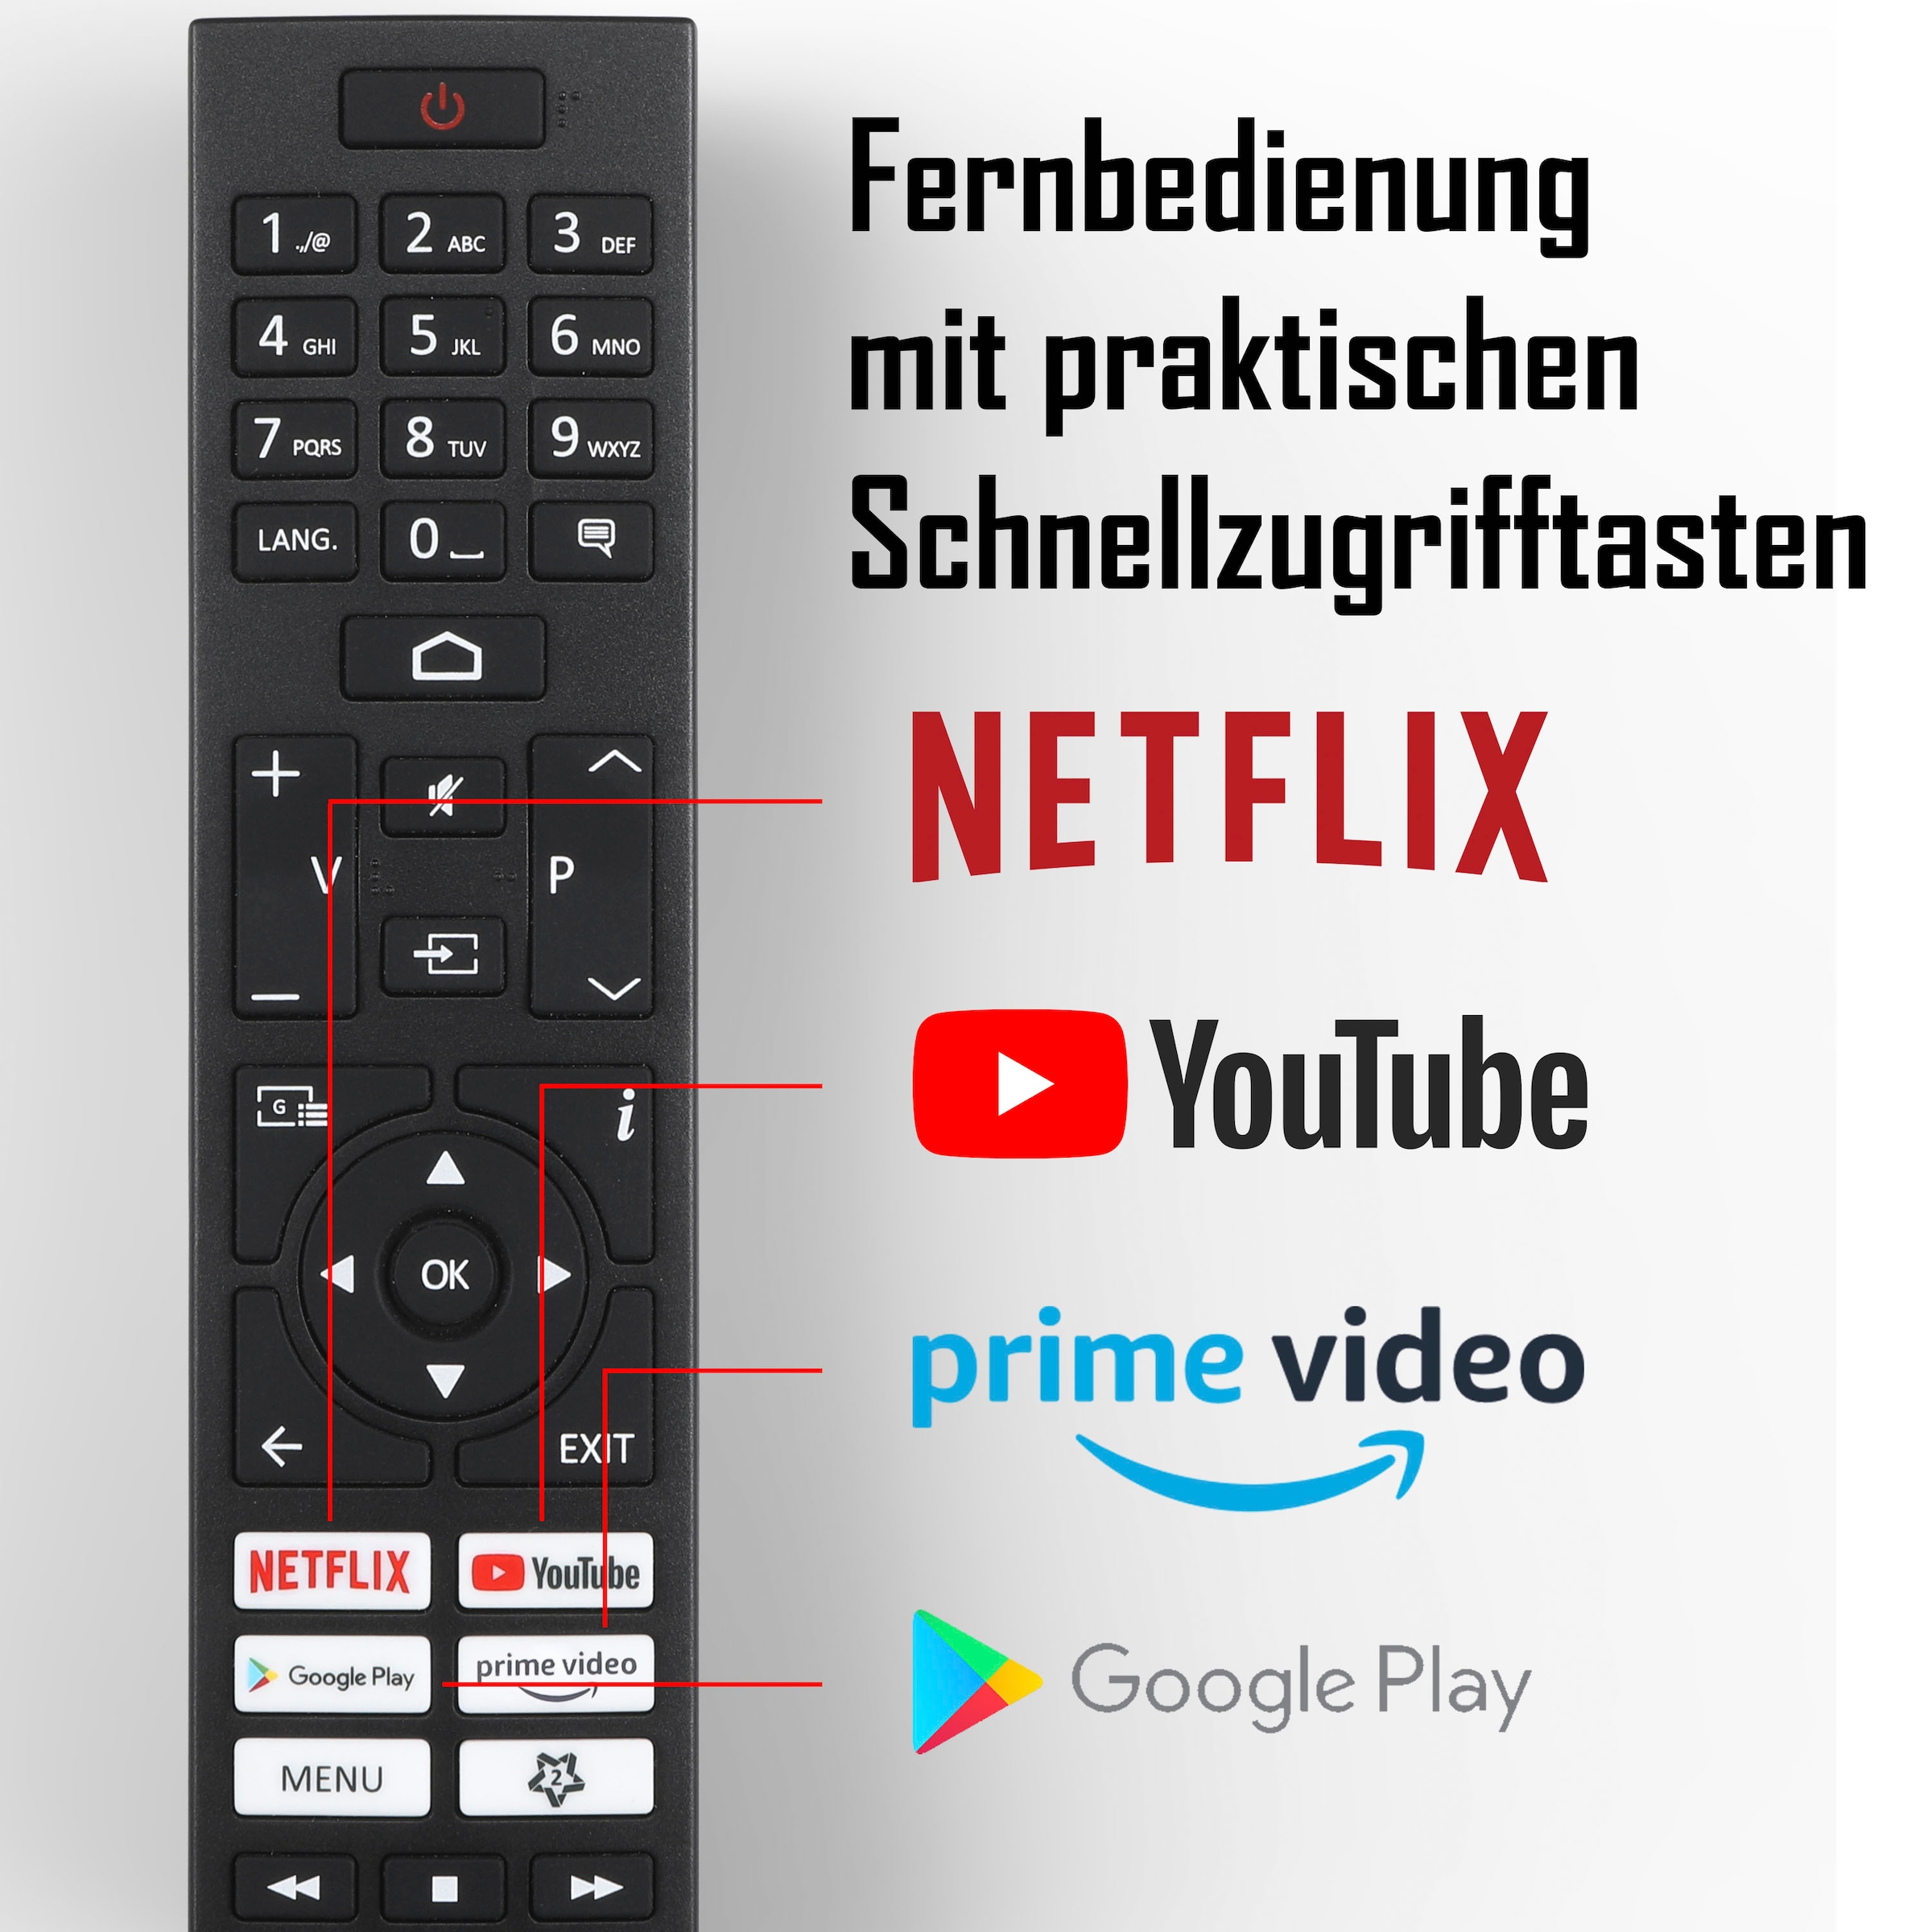 JVC LCD-LED bei Android kaufen OTTO 60 jetzt Smart-TV Zoll, cm/24 »LT-24VAH3255«, HD TV- Fernseher ready